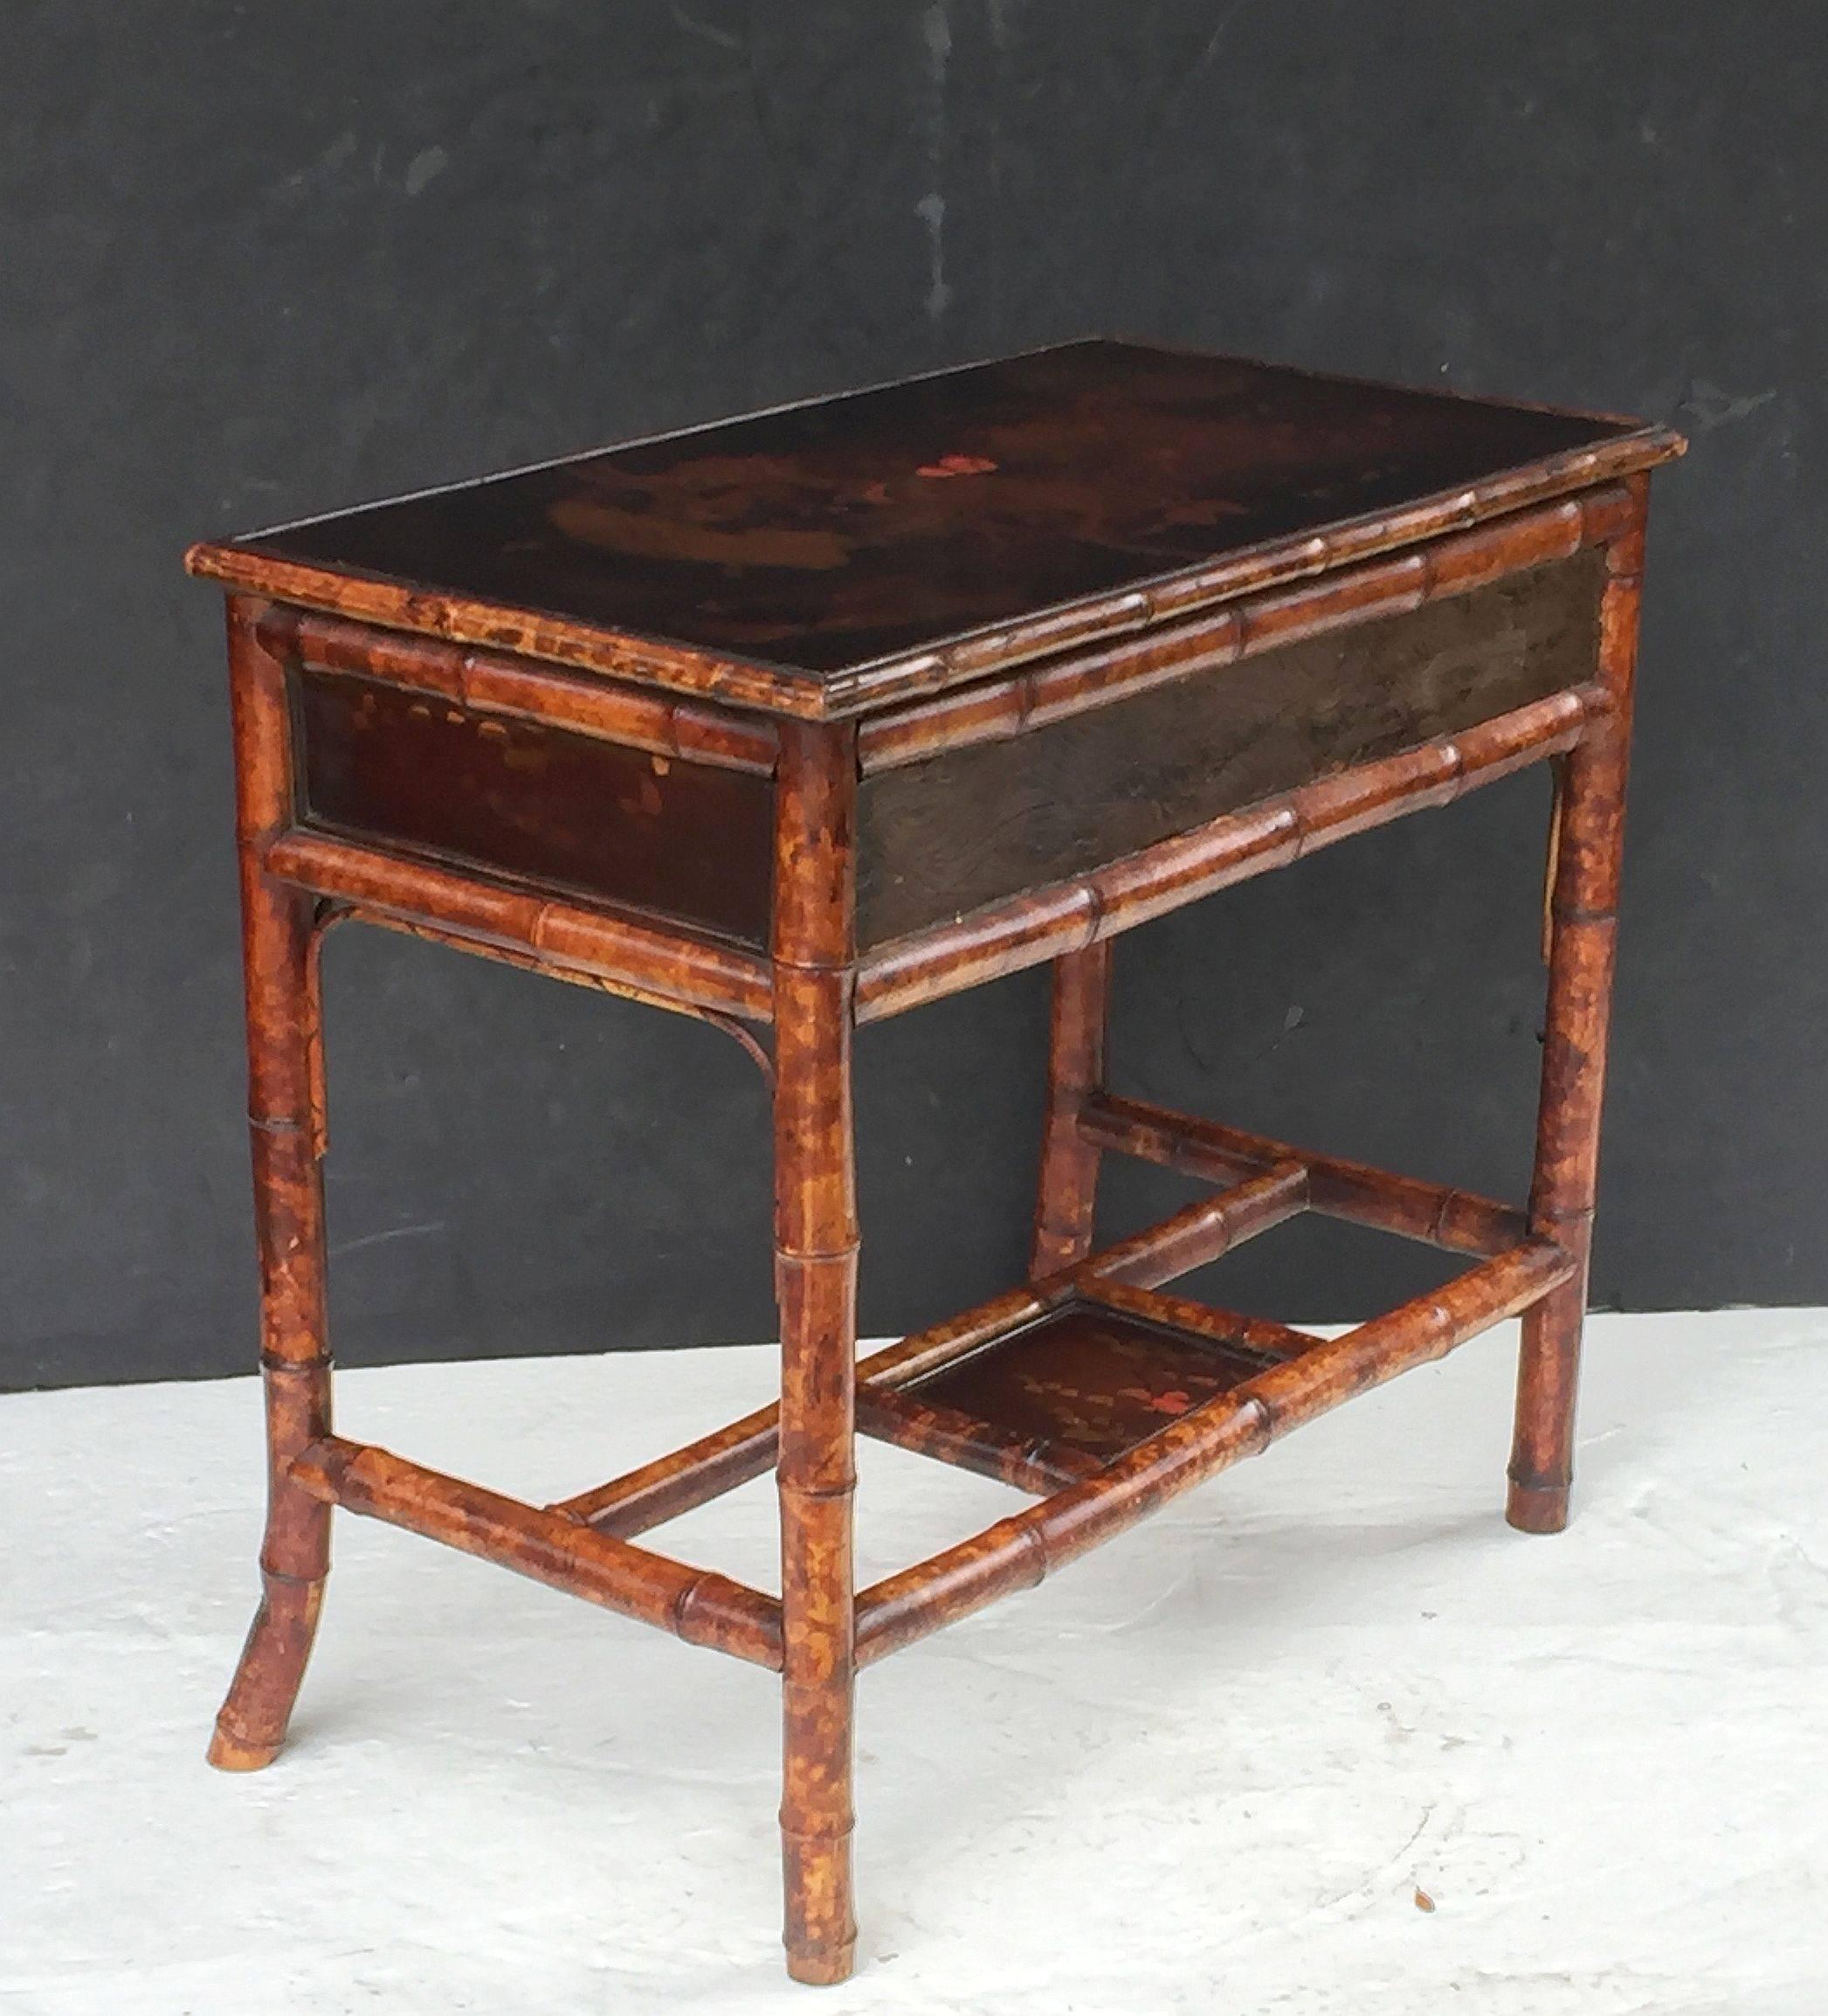 19th Century English Bamboo Desk or Writing Table with Lacquered Top